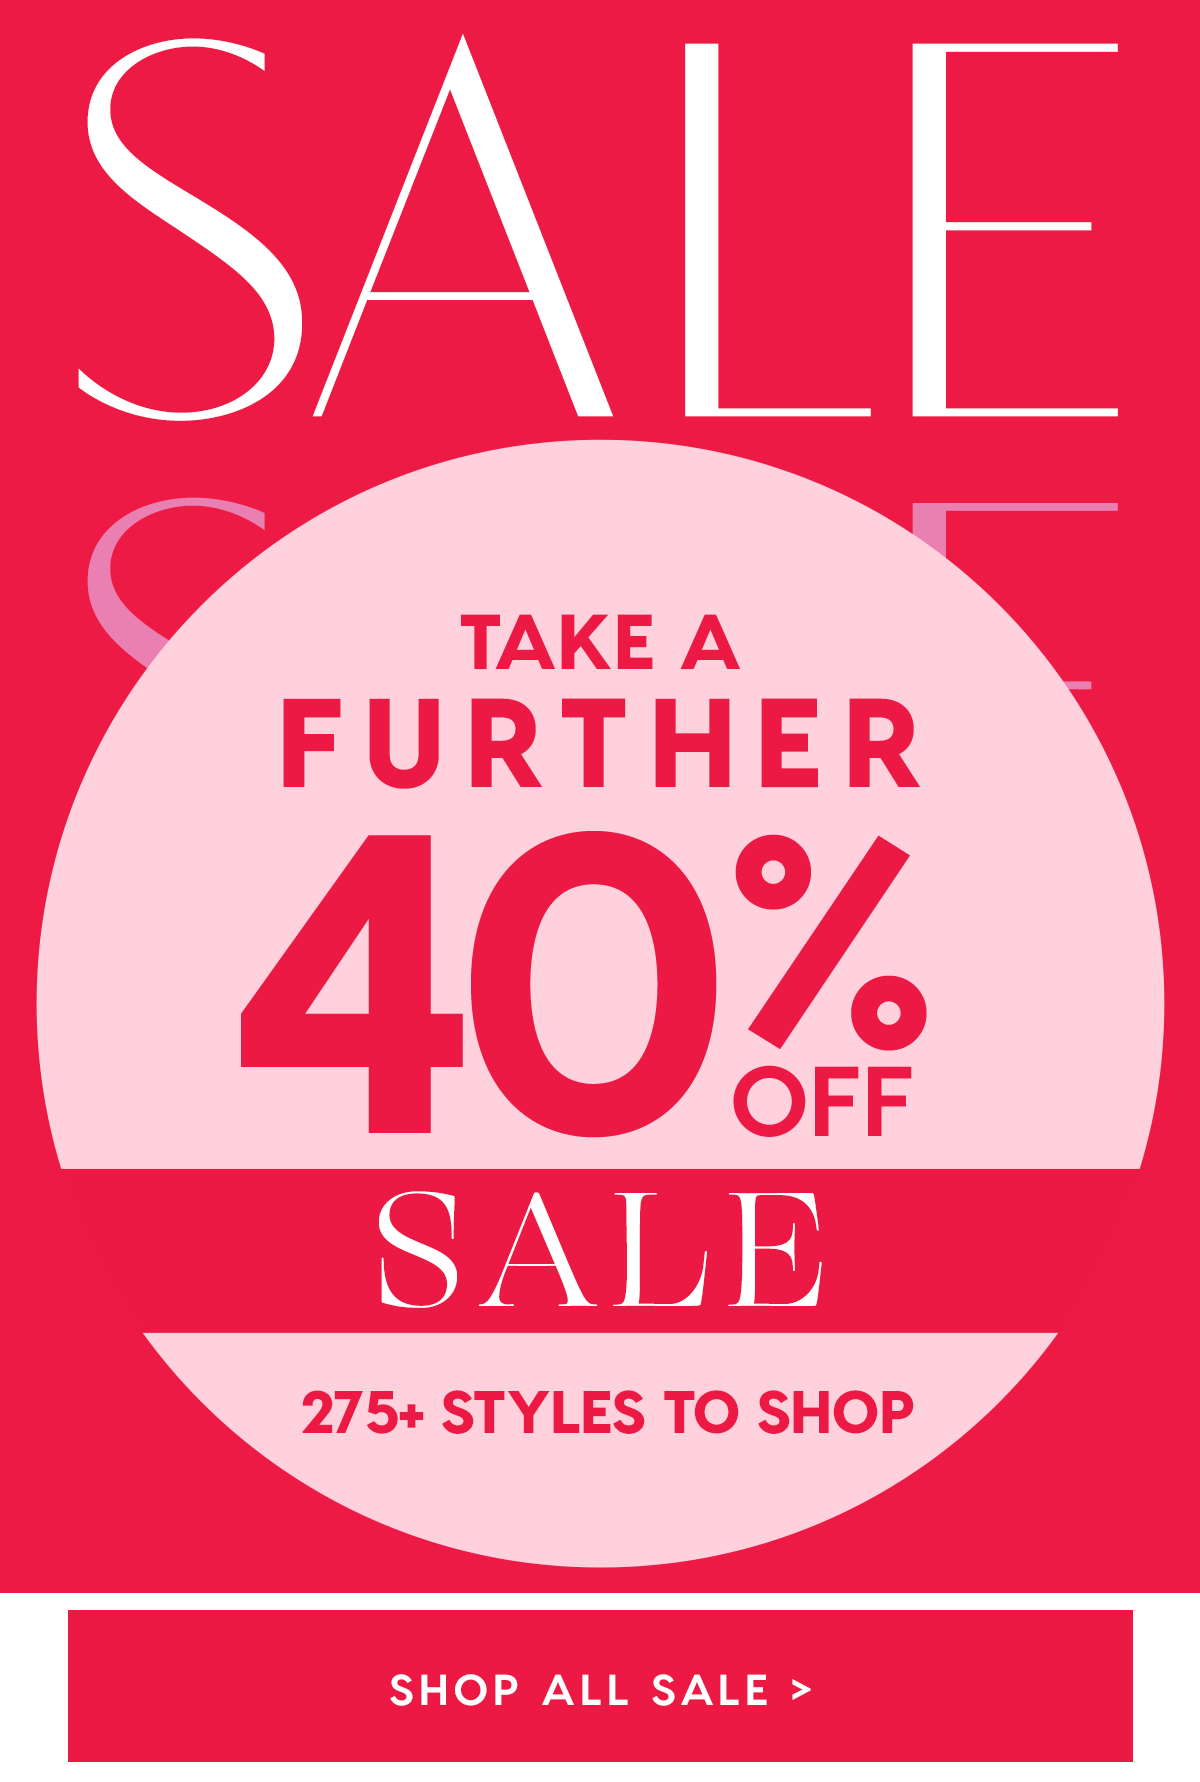 Take a further 40% off sale 300+ Styles to shop